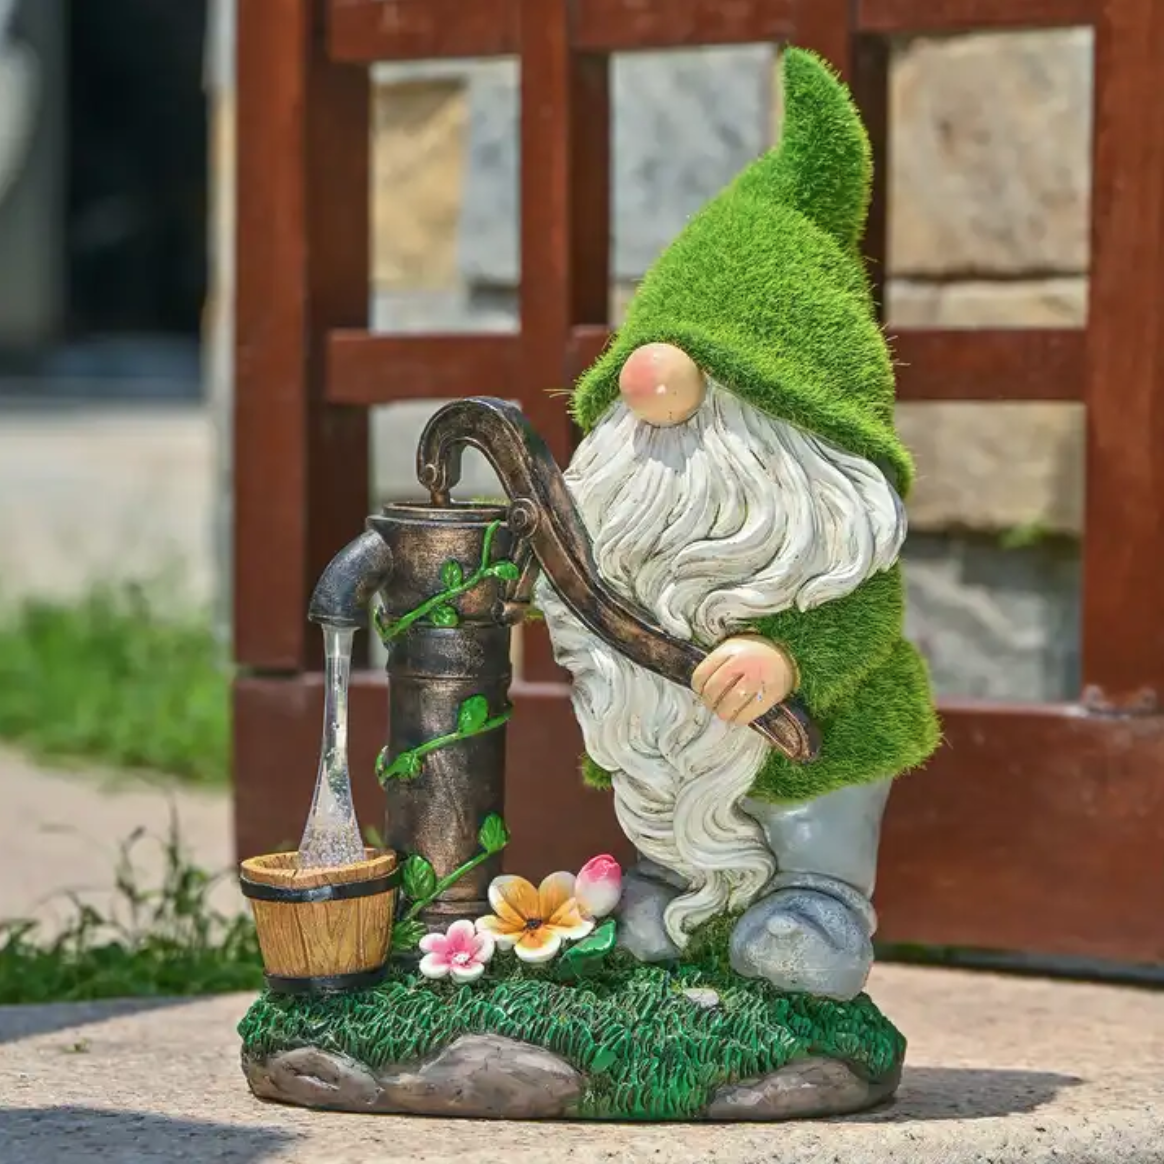 Gnome with white long beard and green flocked hat, getting water from a water pump, standing outside in a garden.